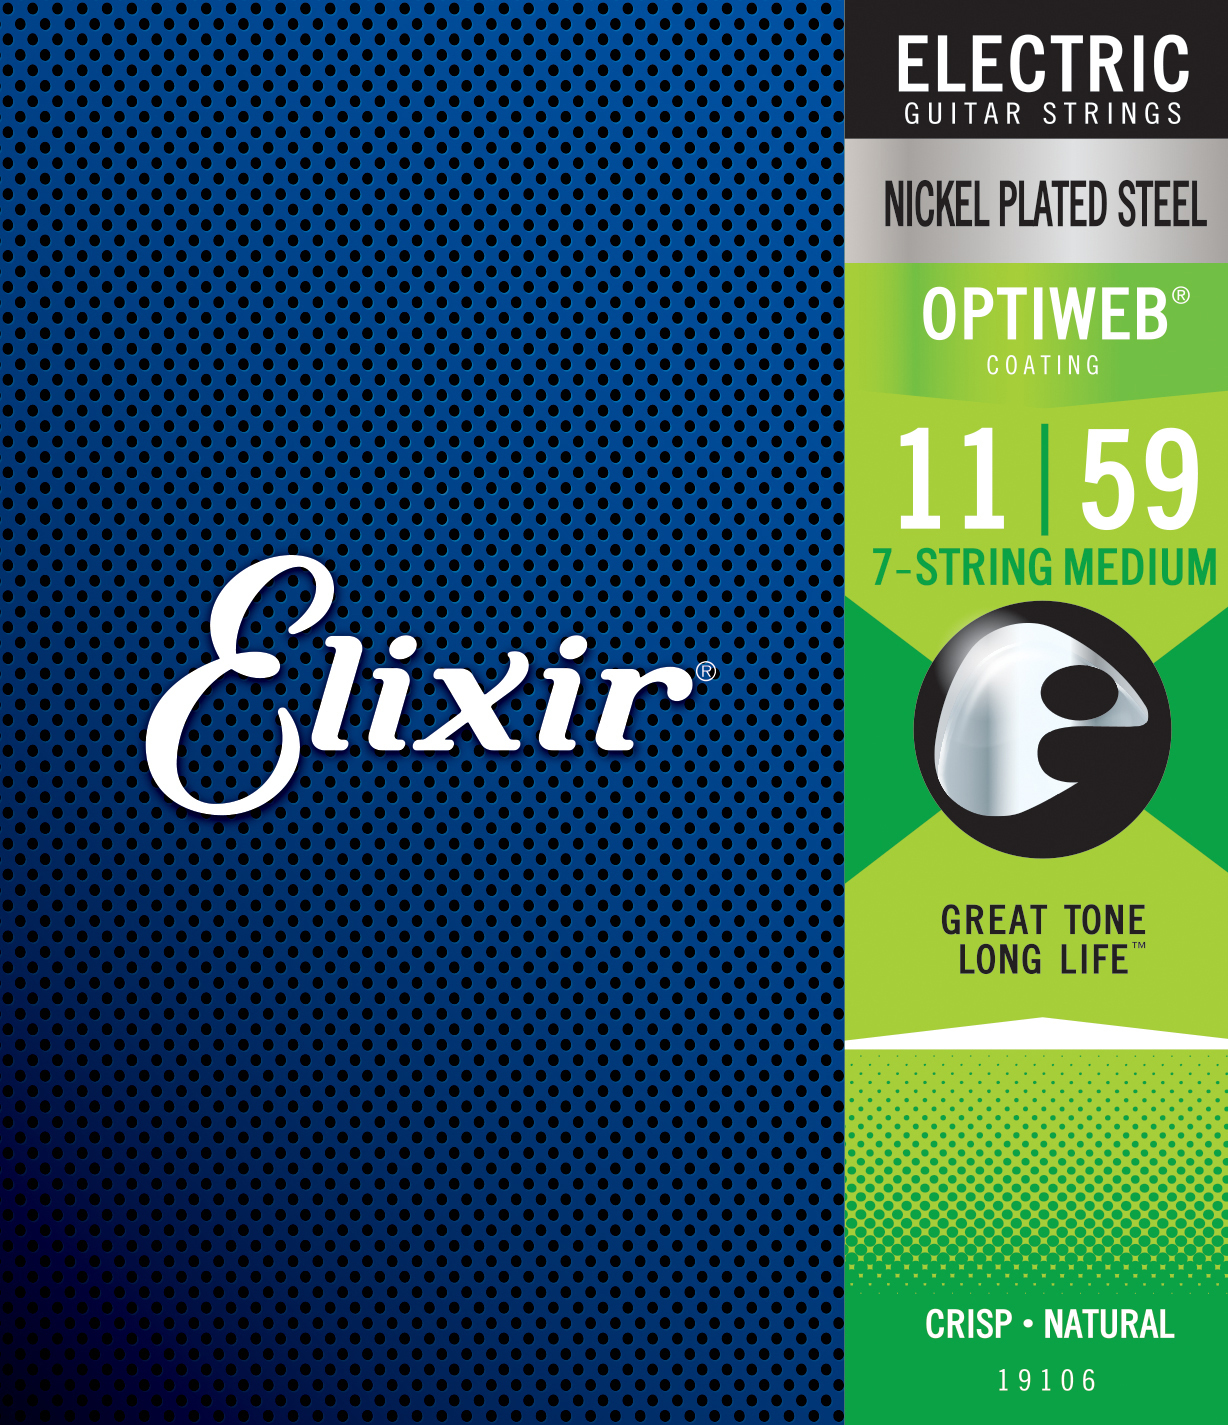 Elixir 19106 Optiweb Nps Round Wound Electric Guitar 7c 11-59 - Electric guitar strings - Main picture